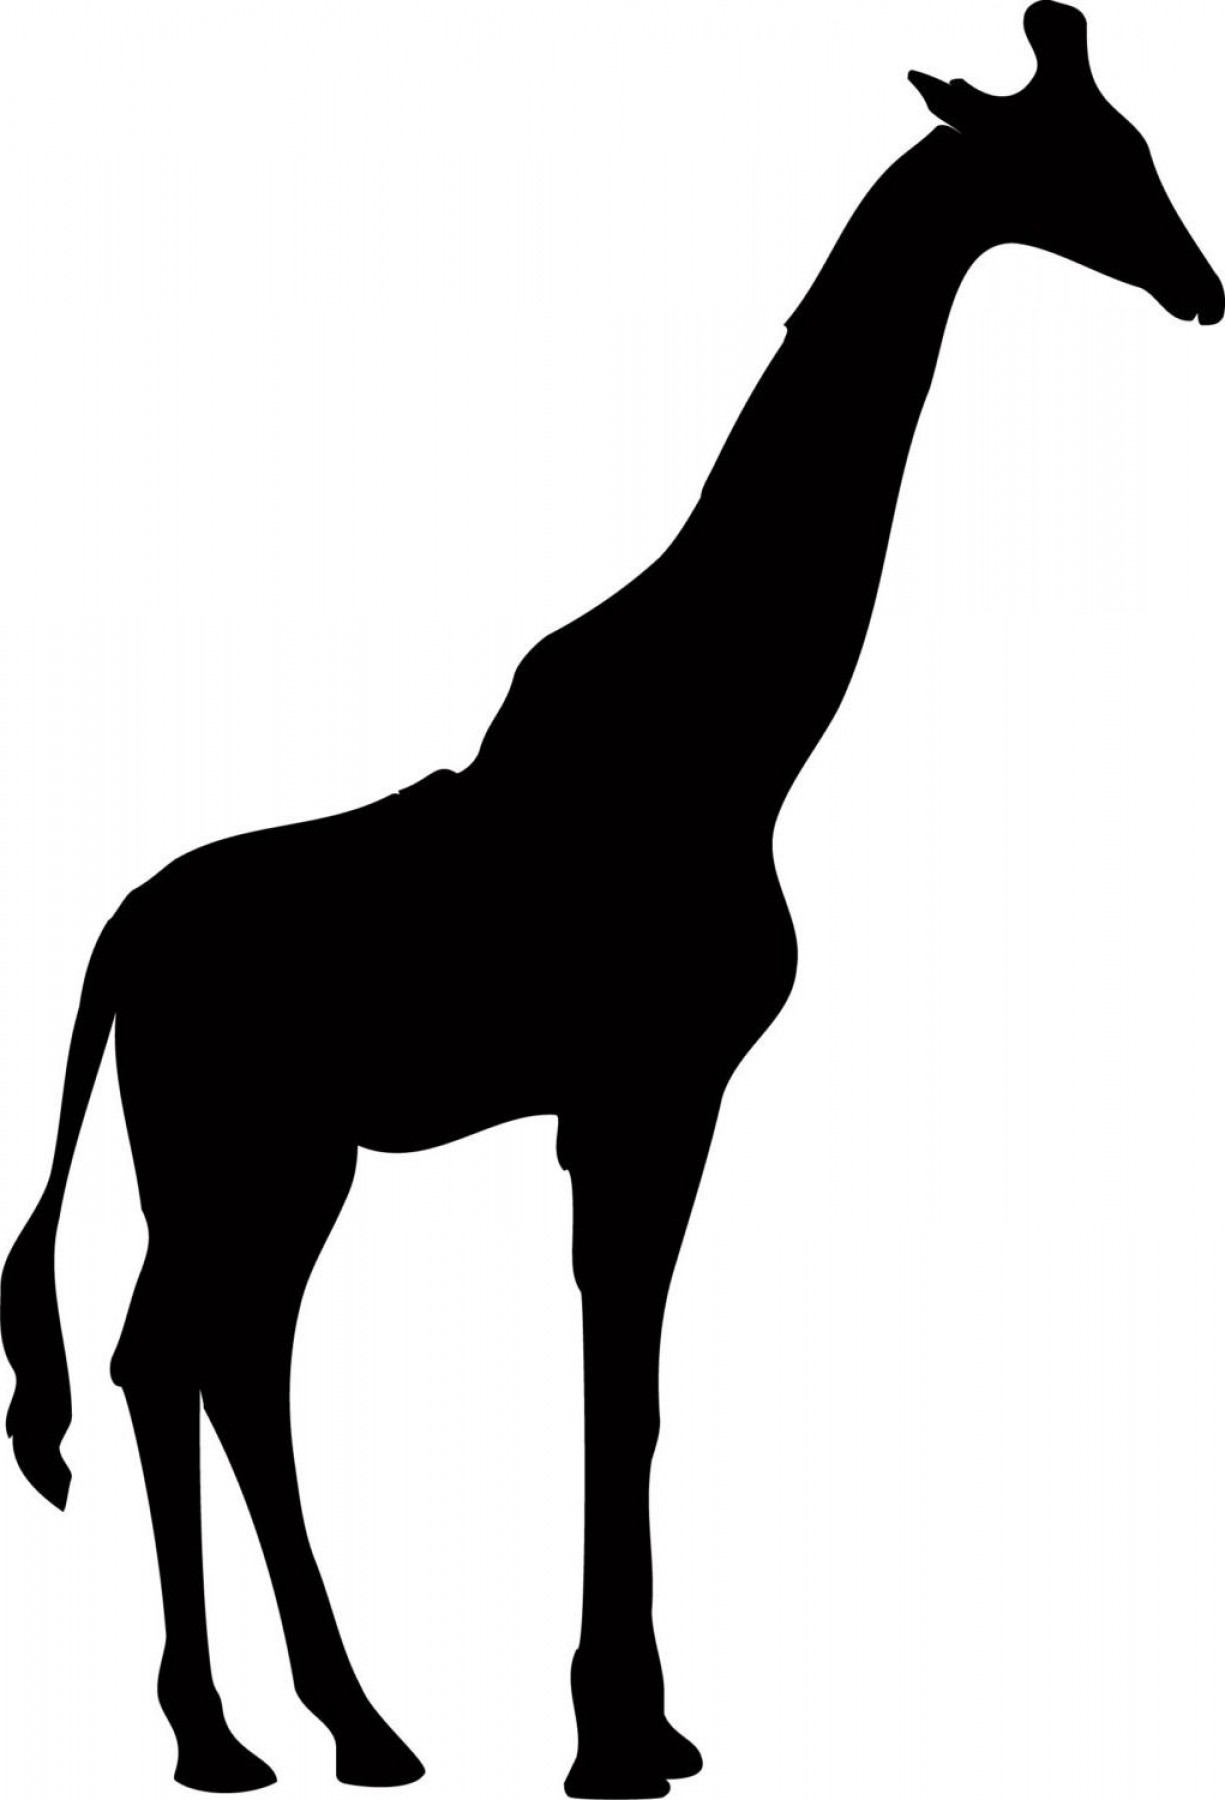 Download Giraffe Silhouette Vector at Vectorified.com | Collection of Giraffe Silhouette Vector free for ...